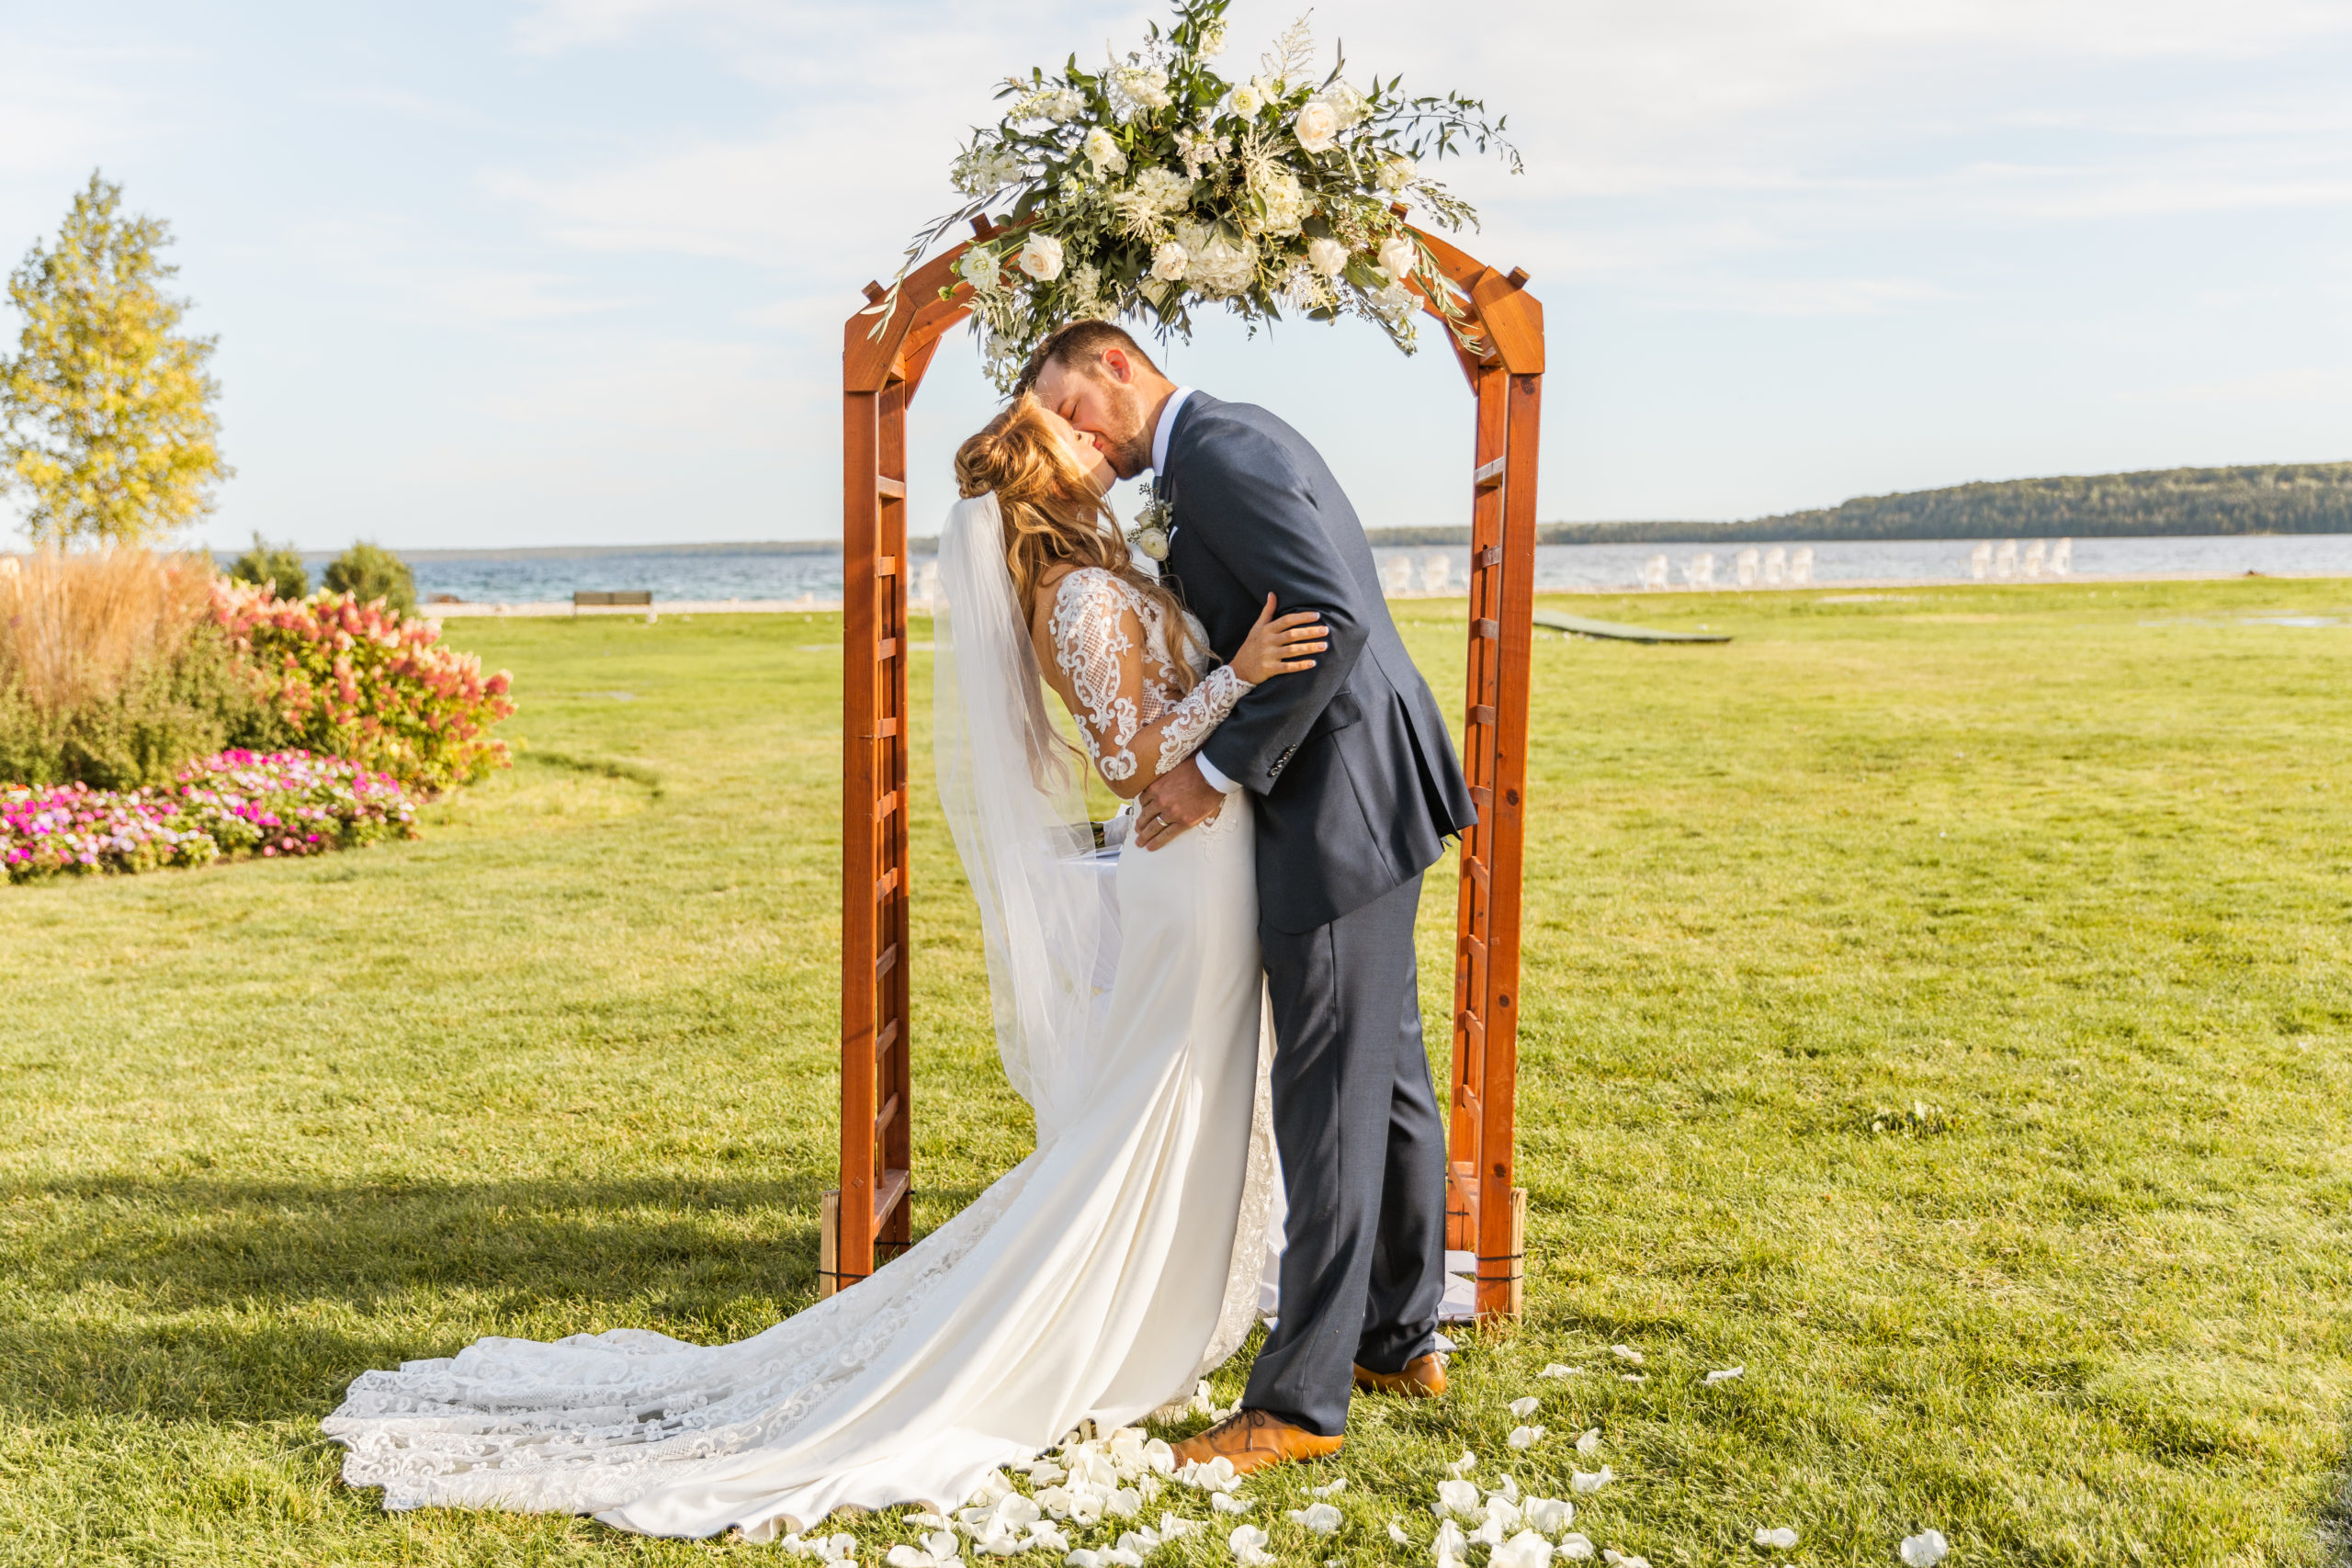 Bride and Groom Kissing at Mackinac Island wedding ceremony on lawn in front of Lake Michigan